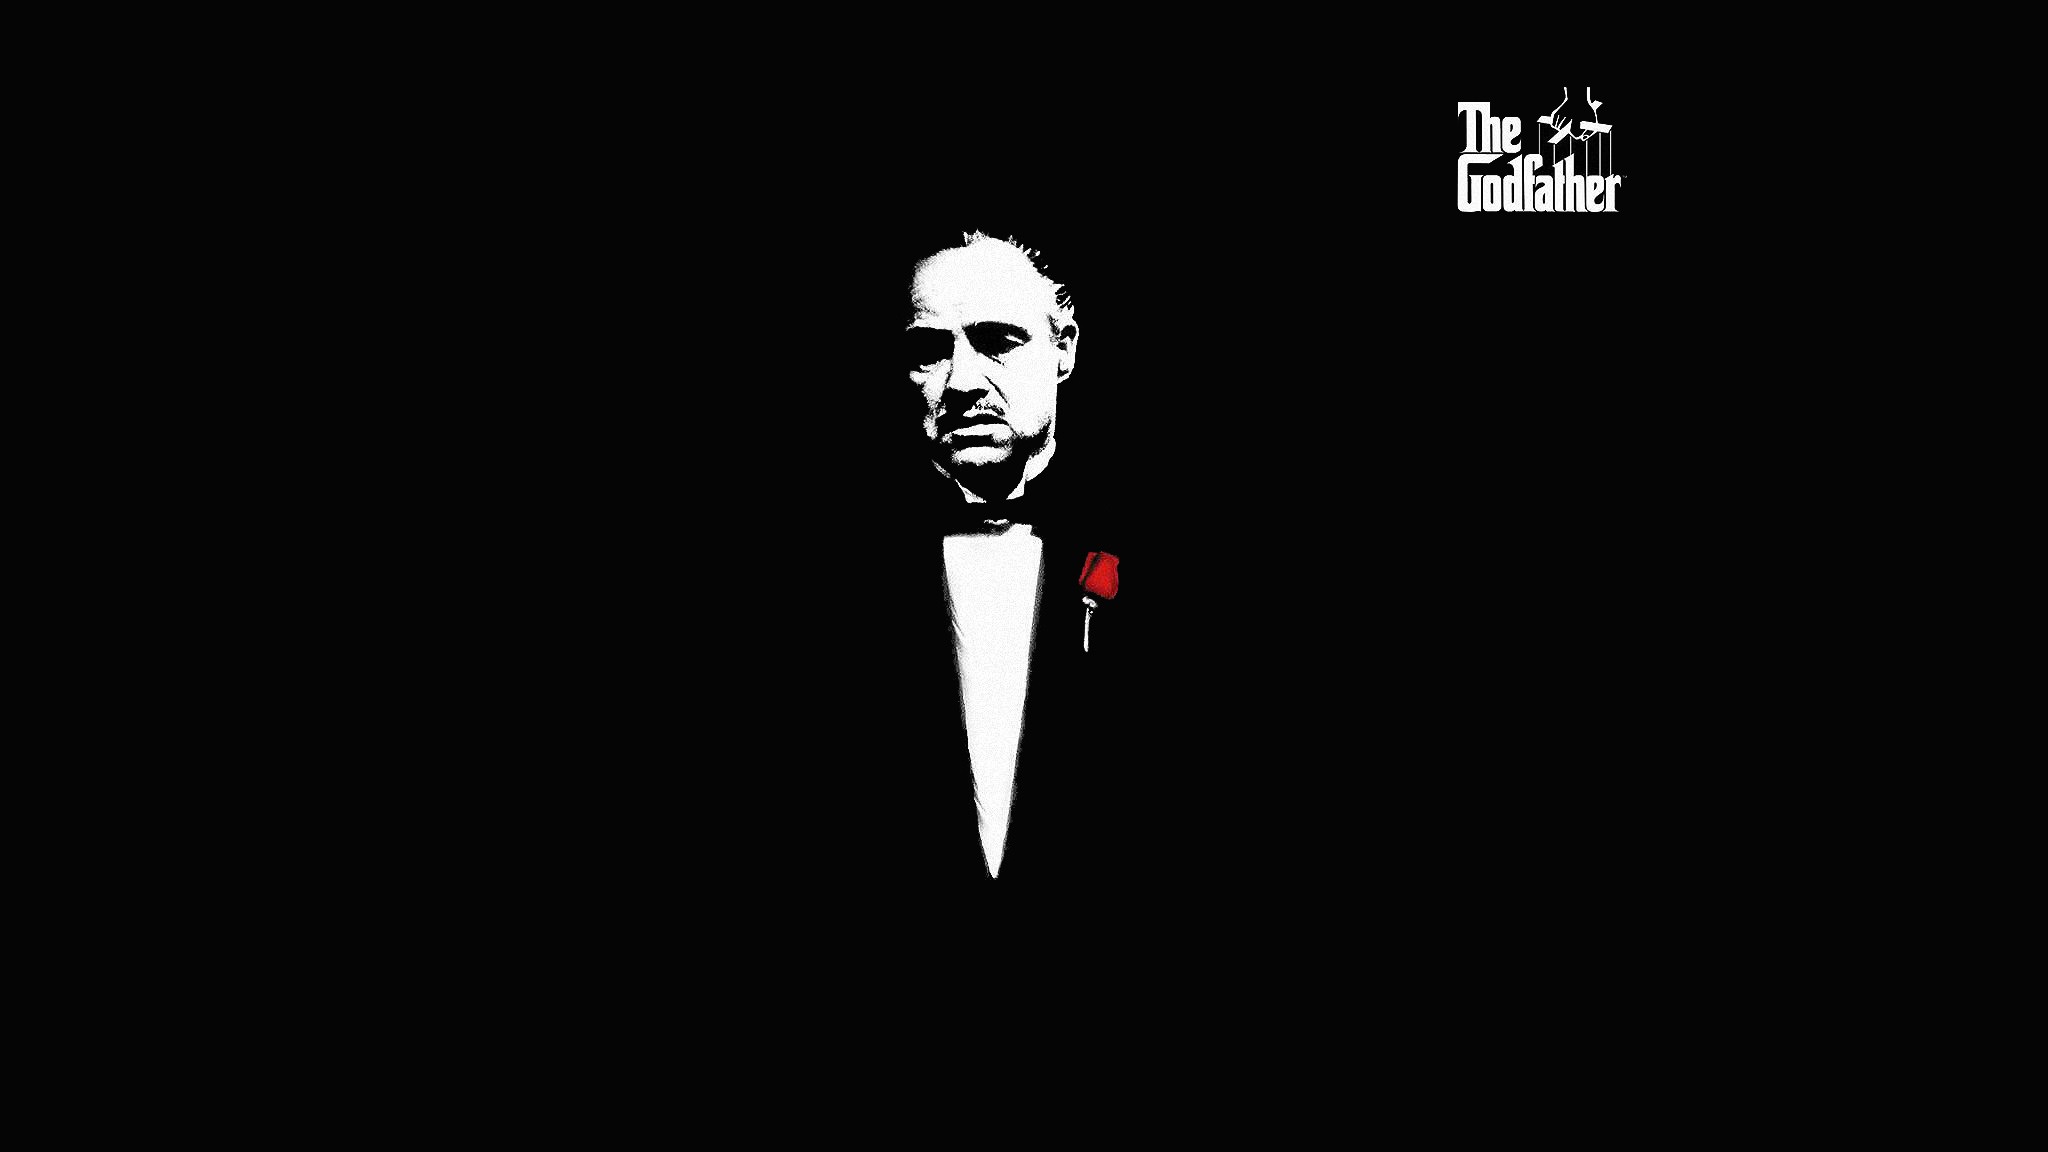 Free Download The Godfather Wallpapers 2048x1152 For Your Desktop 